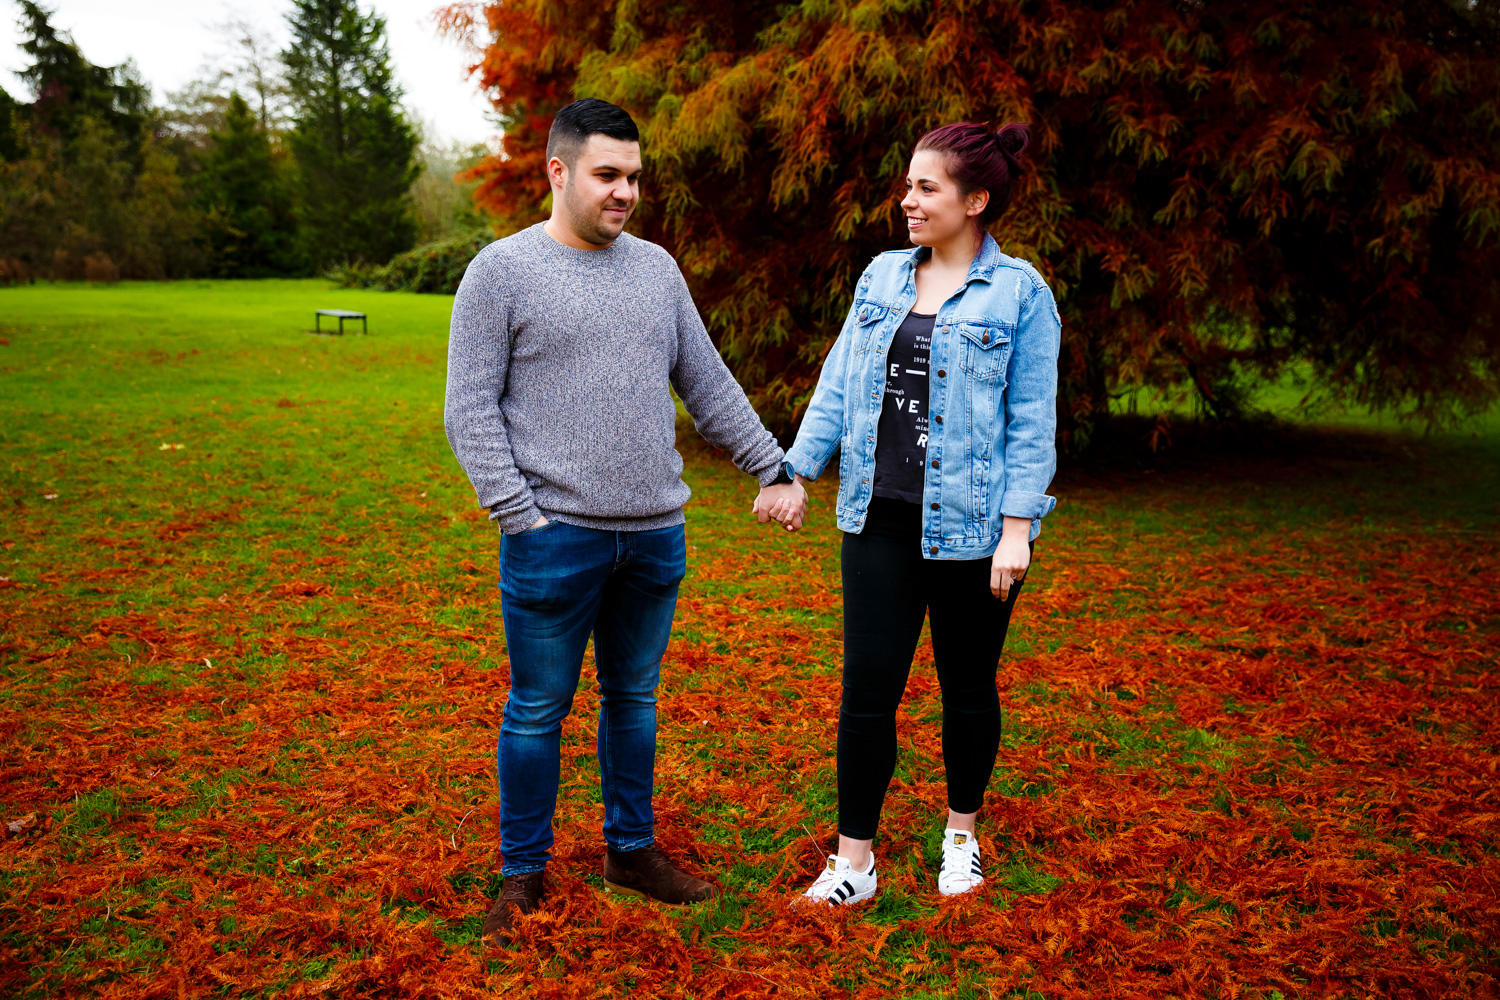 SOLIHULL ENGAGEMENT PHOTOGRAPHER